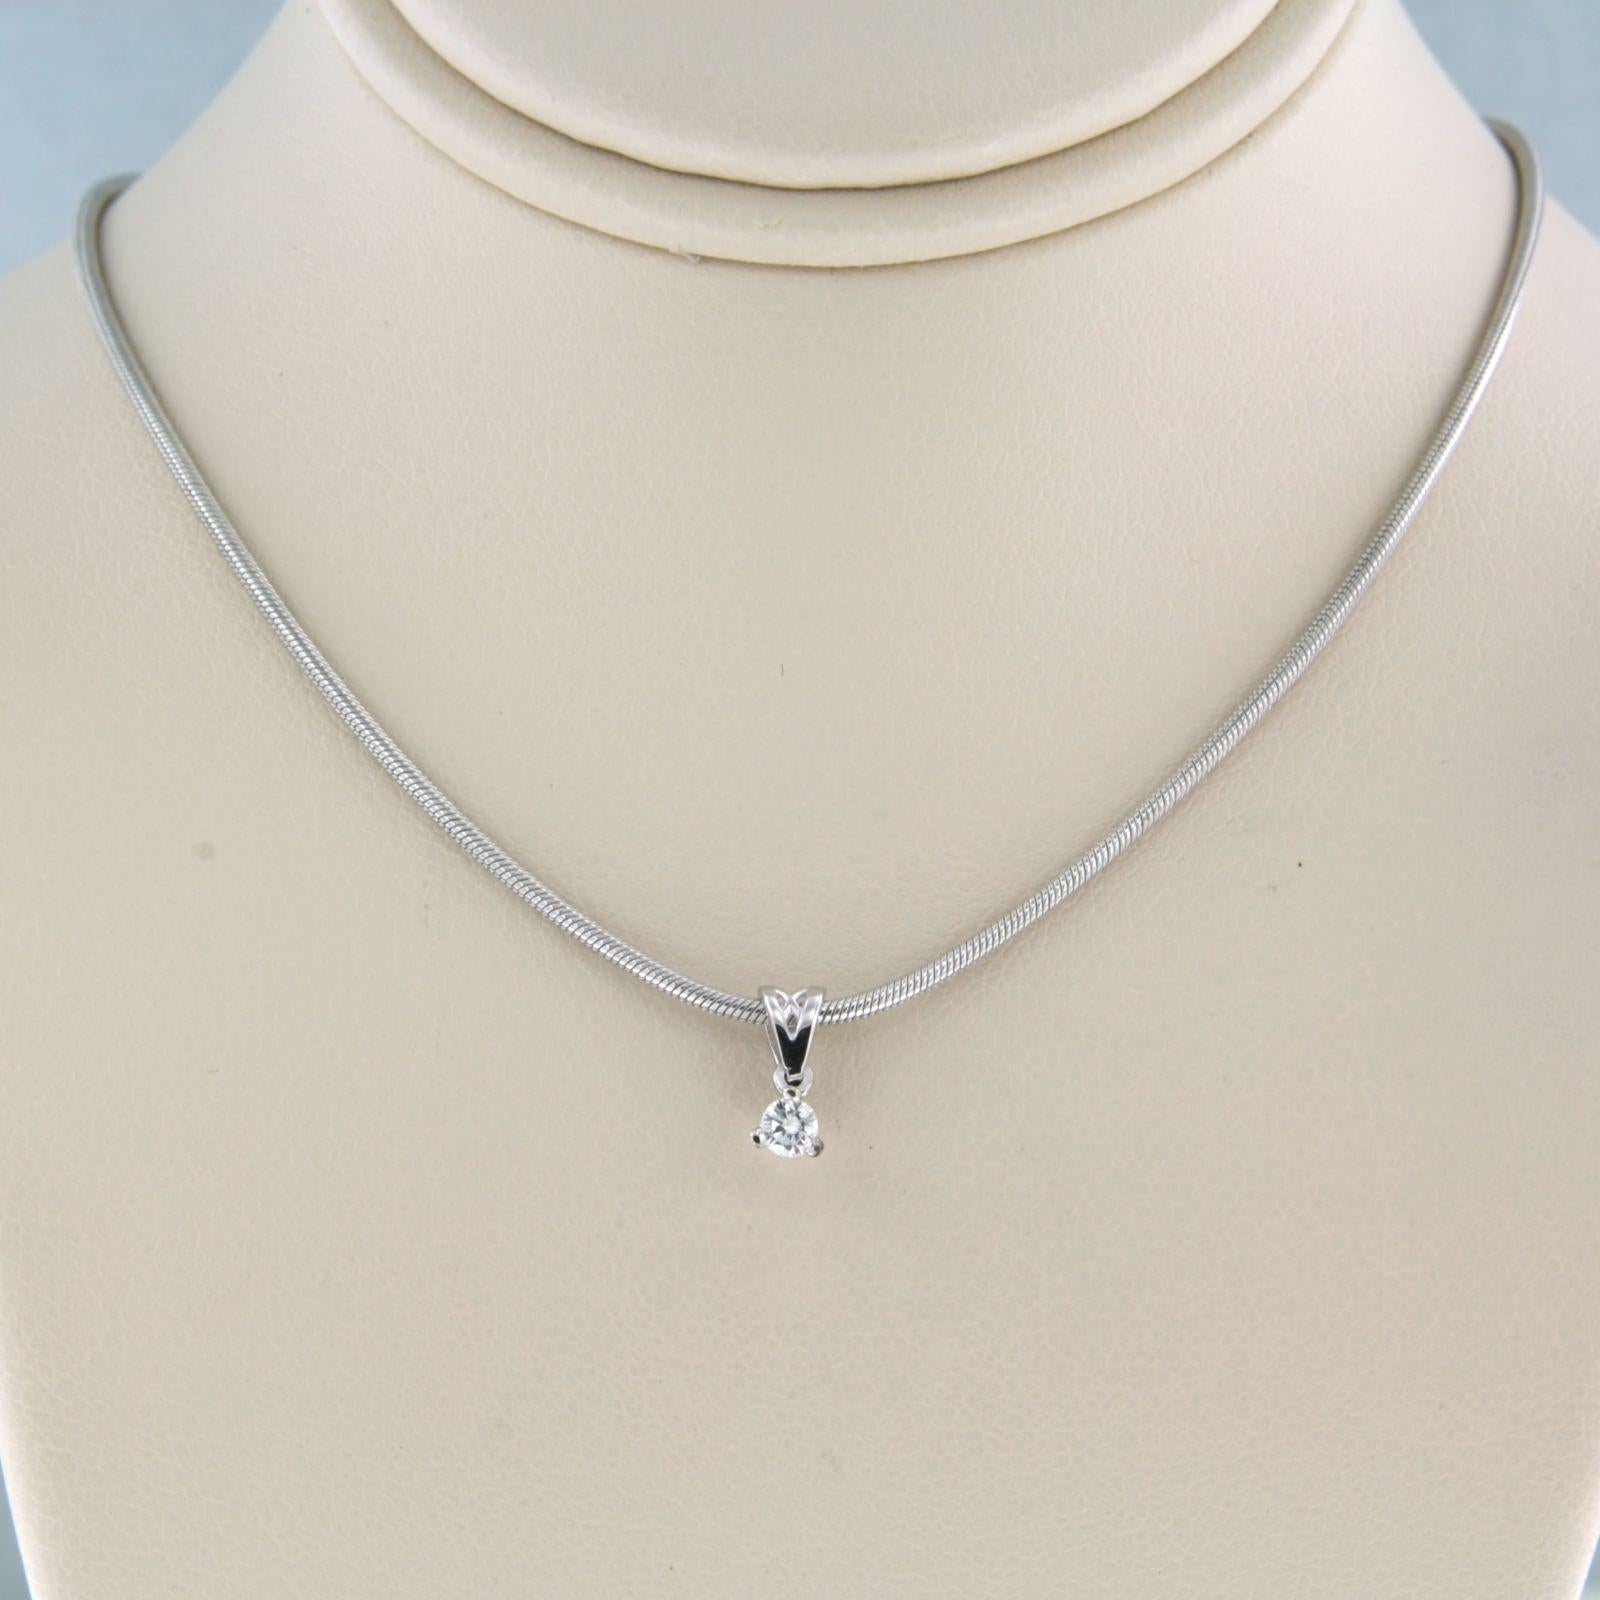 14k white gold necklace with solitaire pendant set with brilliant cut diamonds up to. 0.08ct - F/G - VS/SI - 50 cm long

detailed description

necklace is 50 cm long and 1.2 mm wide

size of the pendant is approximately 8.8 mm long by 3.2 mm